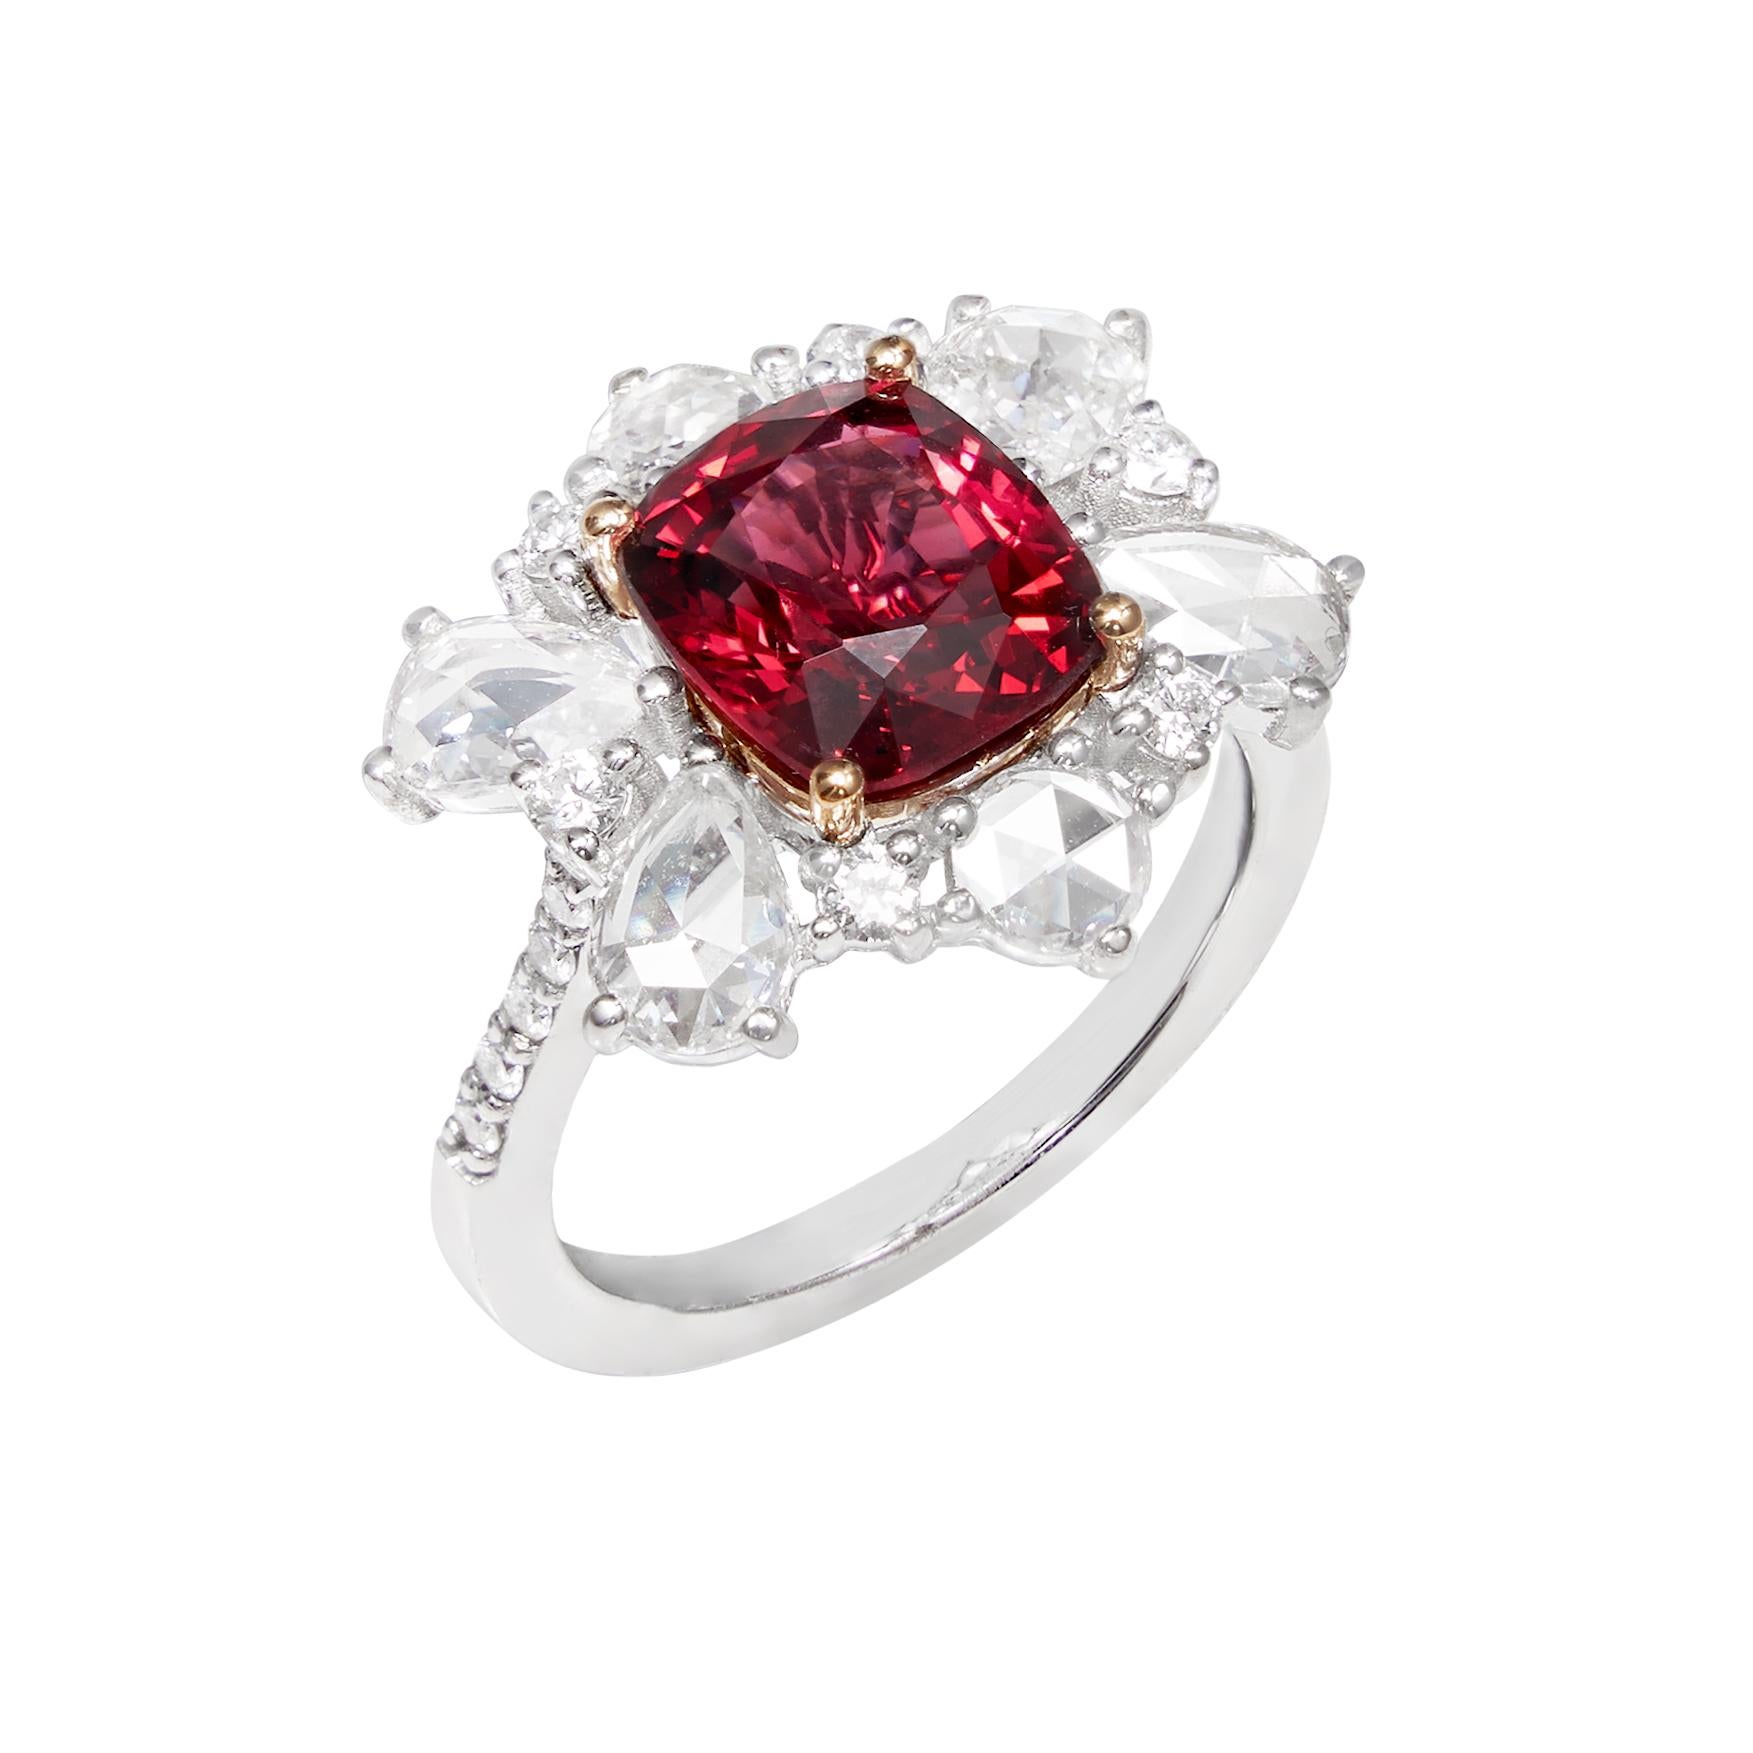 Contemporary 3.3 Carat Burmese Red Spinel Ring with Diamond in 18 Karat White & Yellow Gold For Sale